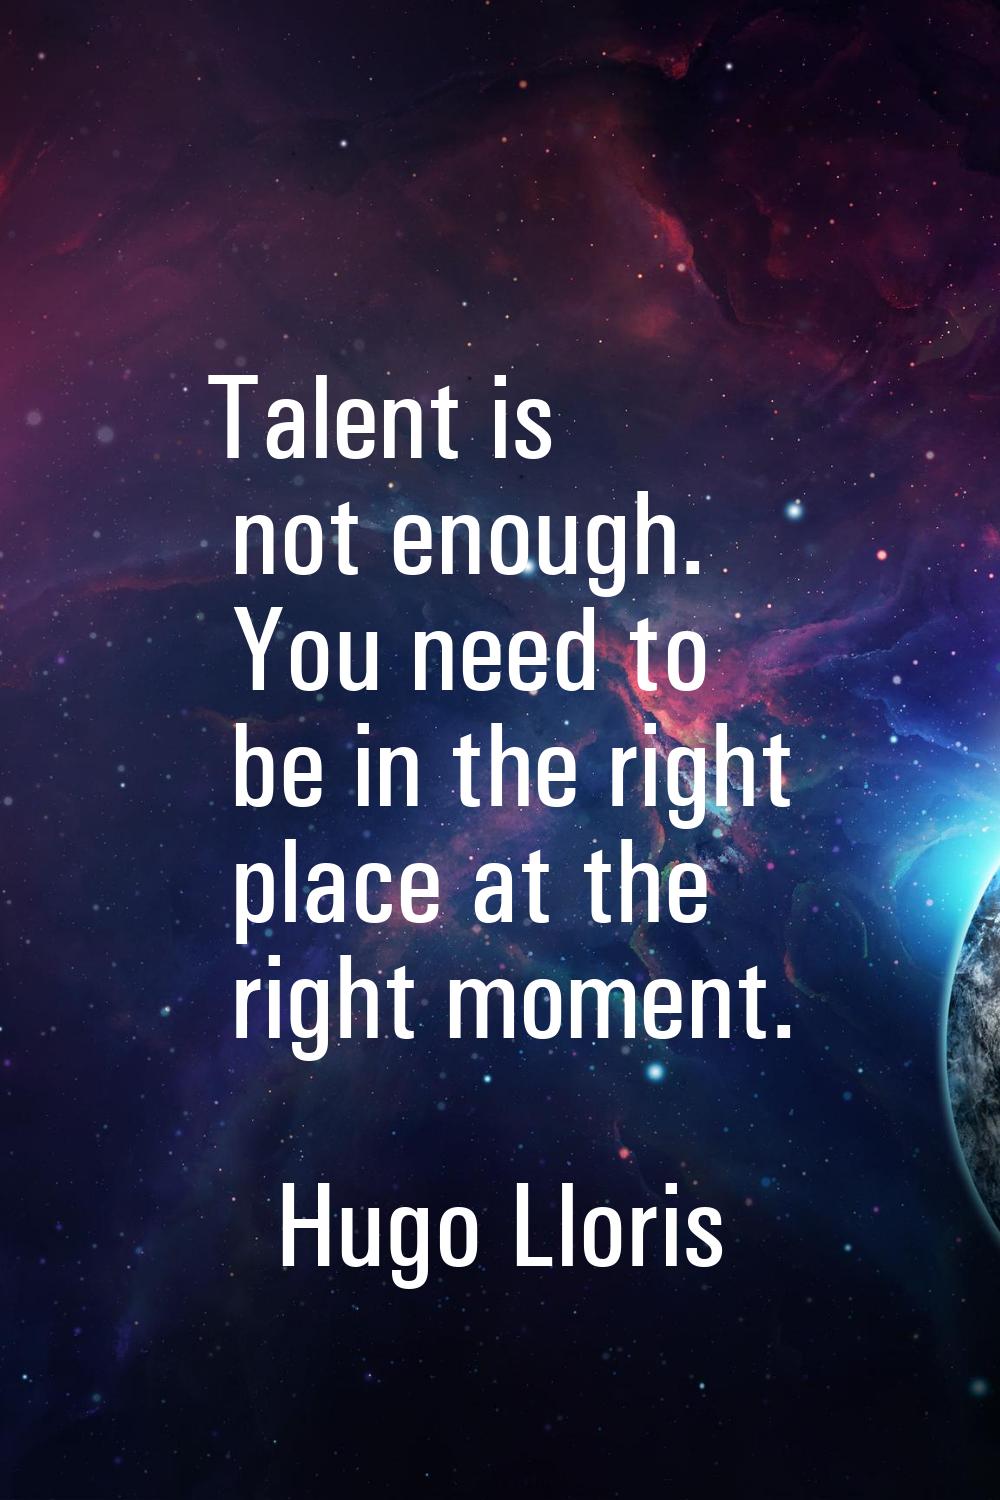 Talent is not enough. You need to be in the right place at the right moment.